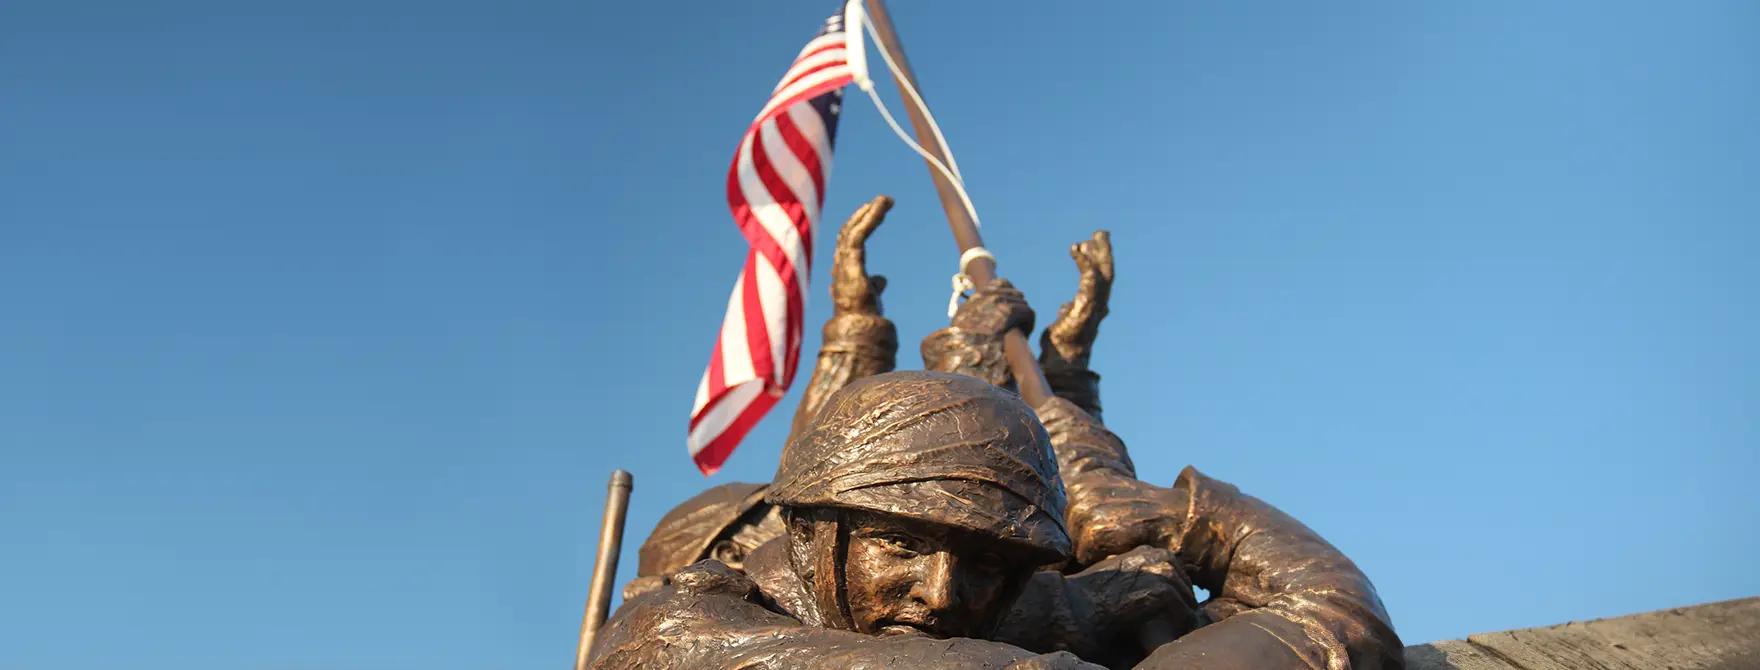 The top of a statue of soldiers holding an American flag